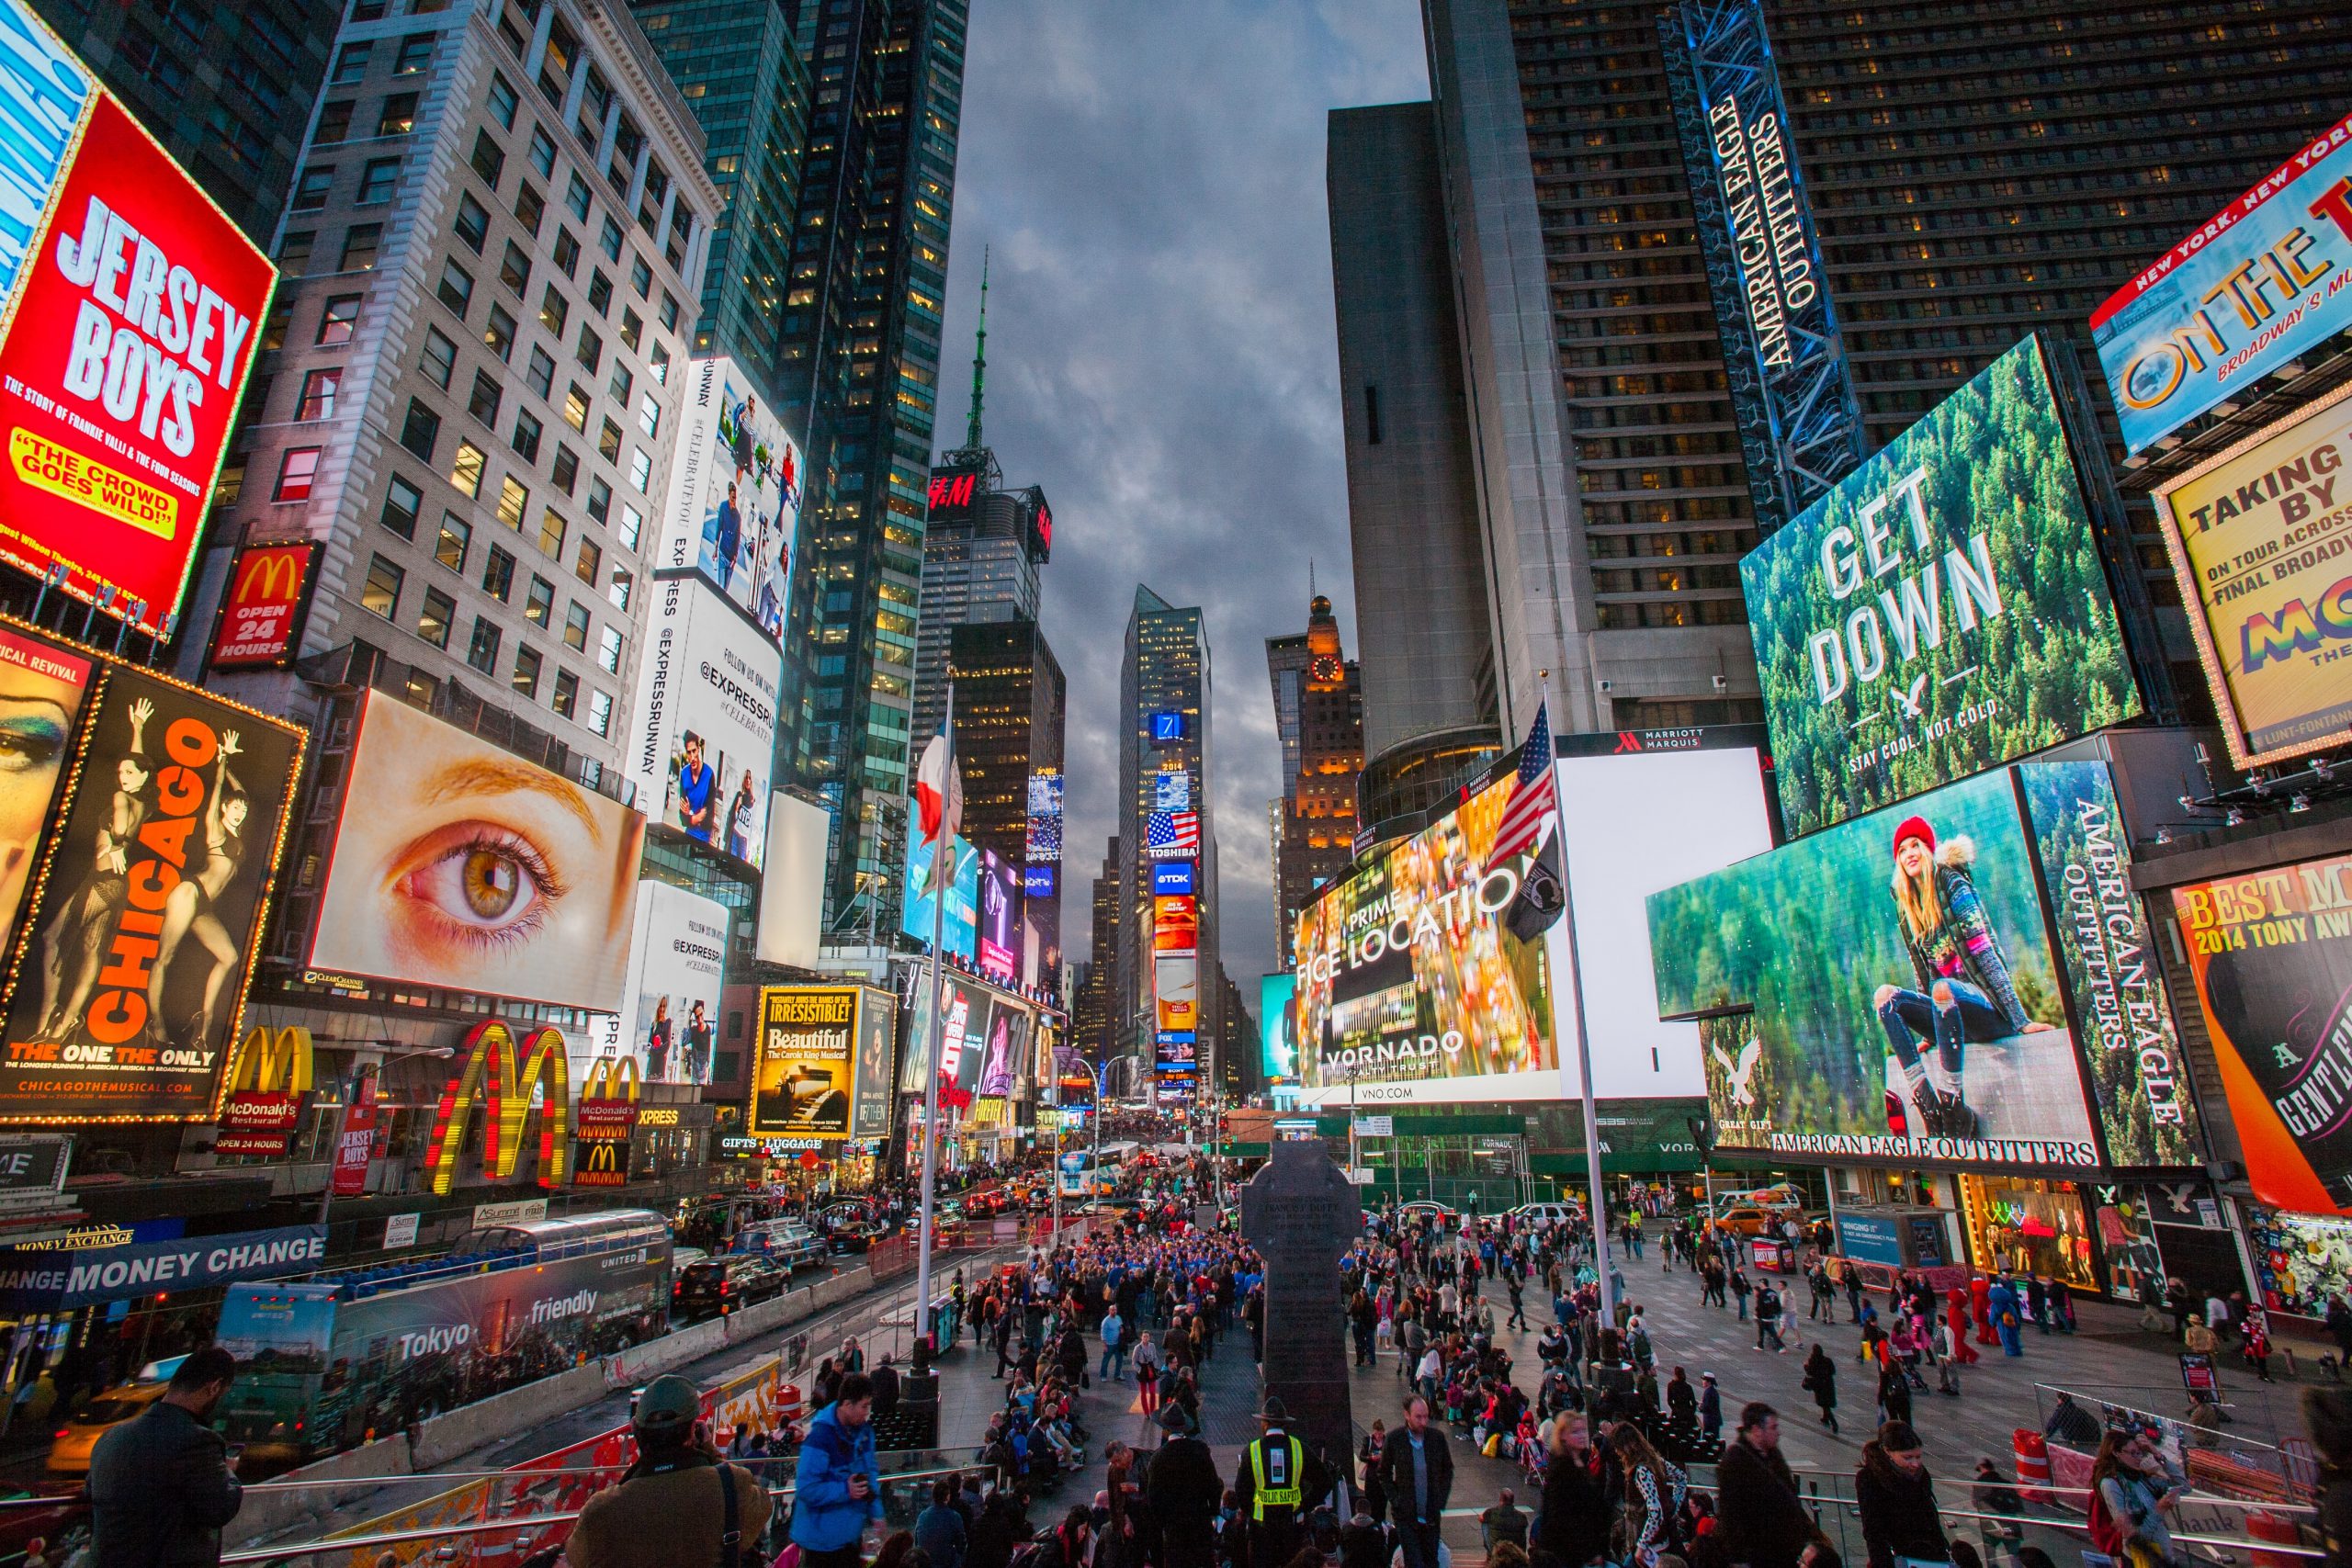 Times Square in Manhattan is a vibrant place to stay in NYC especially for first time visitors